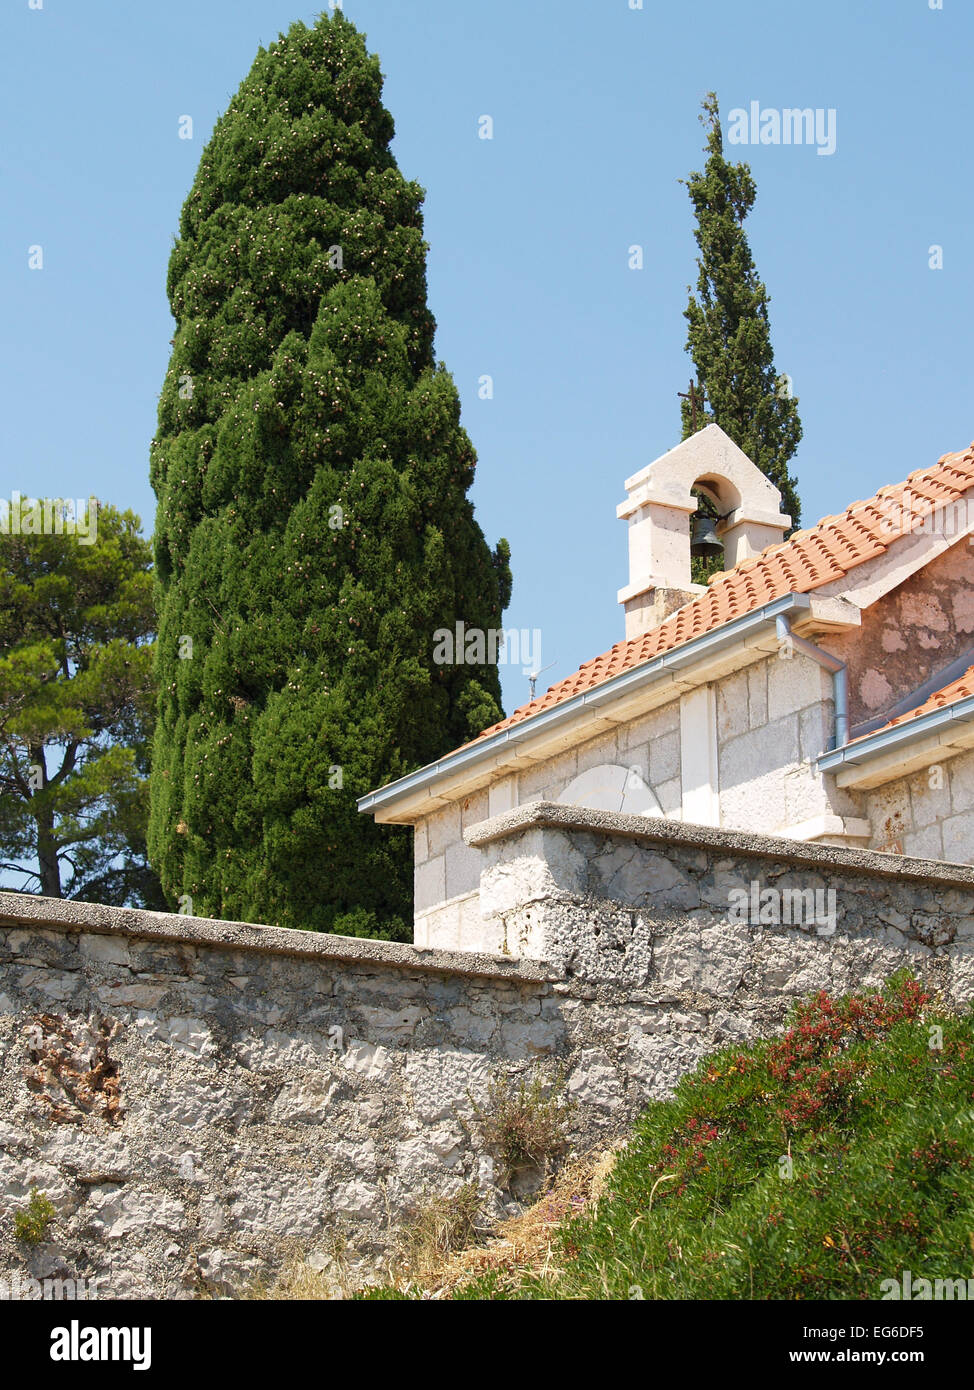 Chapel belfry and cypresses Stock Photo